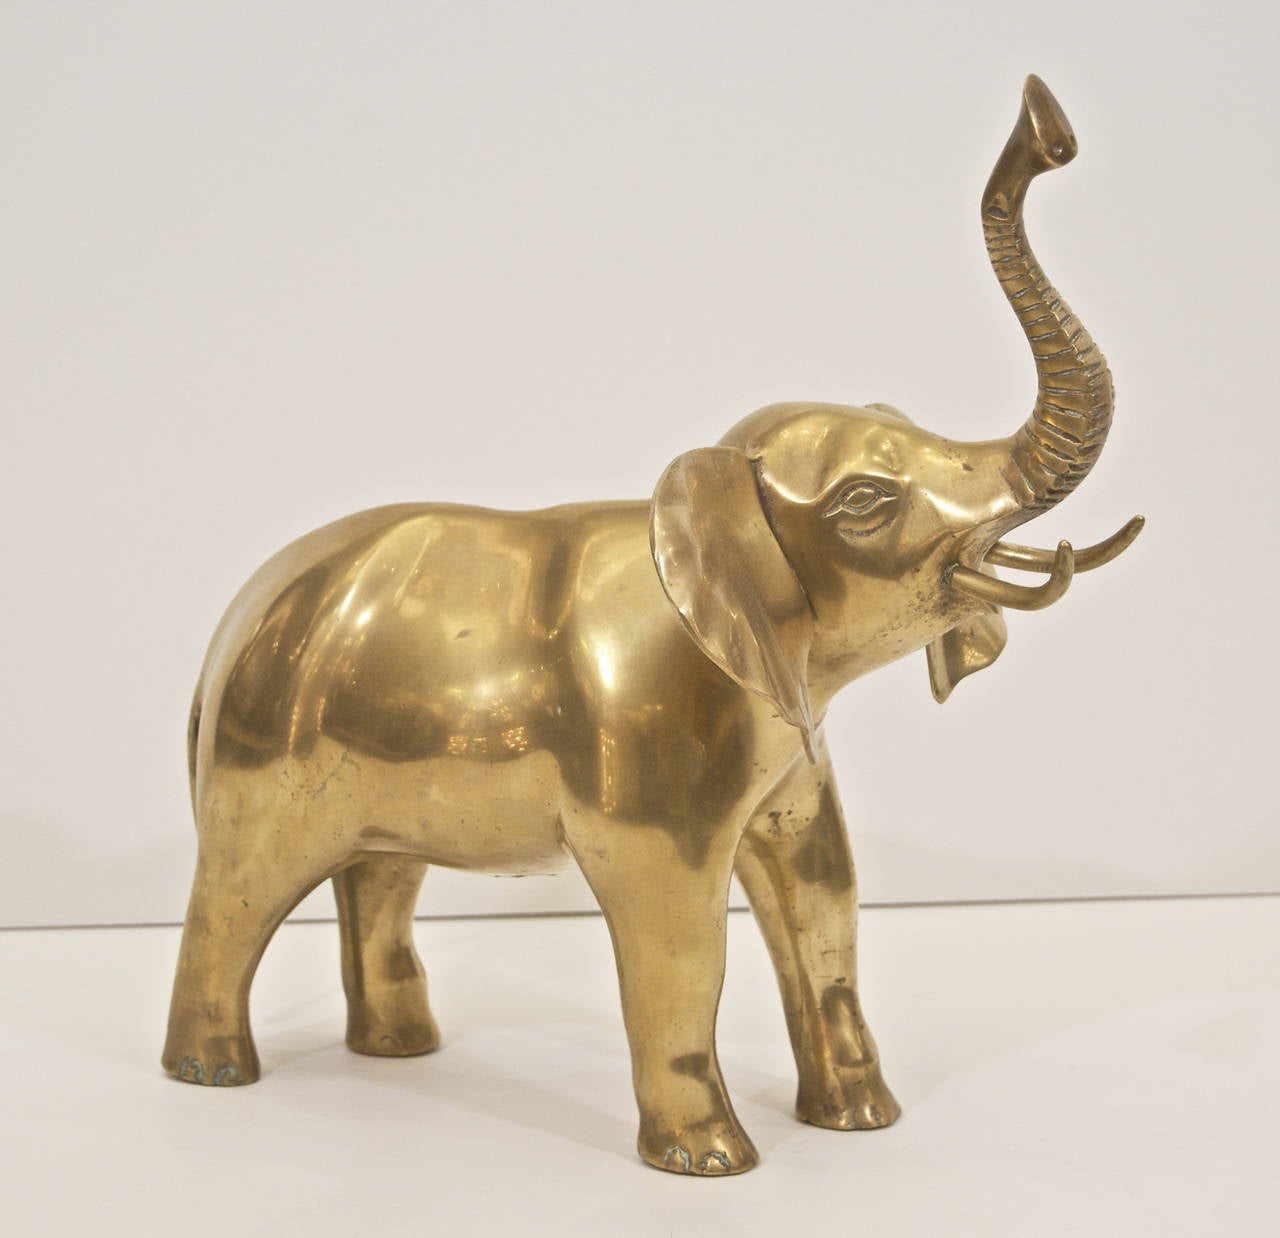 Substantial decorative sculpture in brass of a roaring elephant. Well proportioned and a charming piece.

Image is representative of piece, multiple available. Please inquire for detail images of current stock.